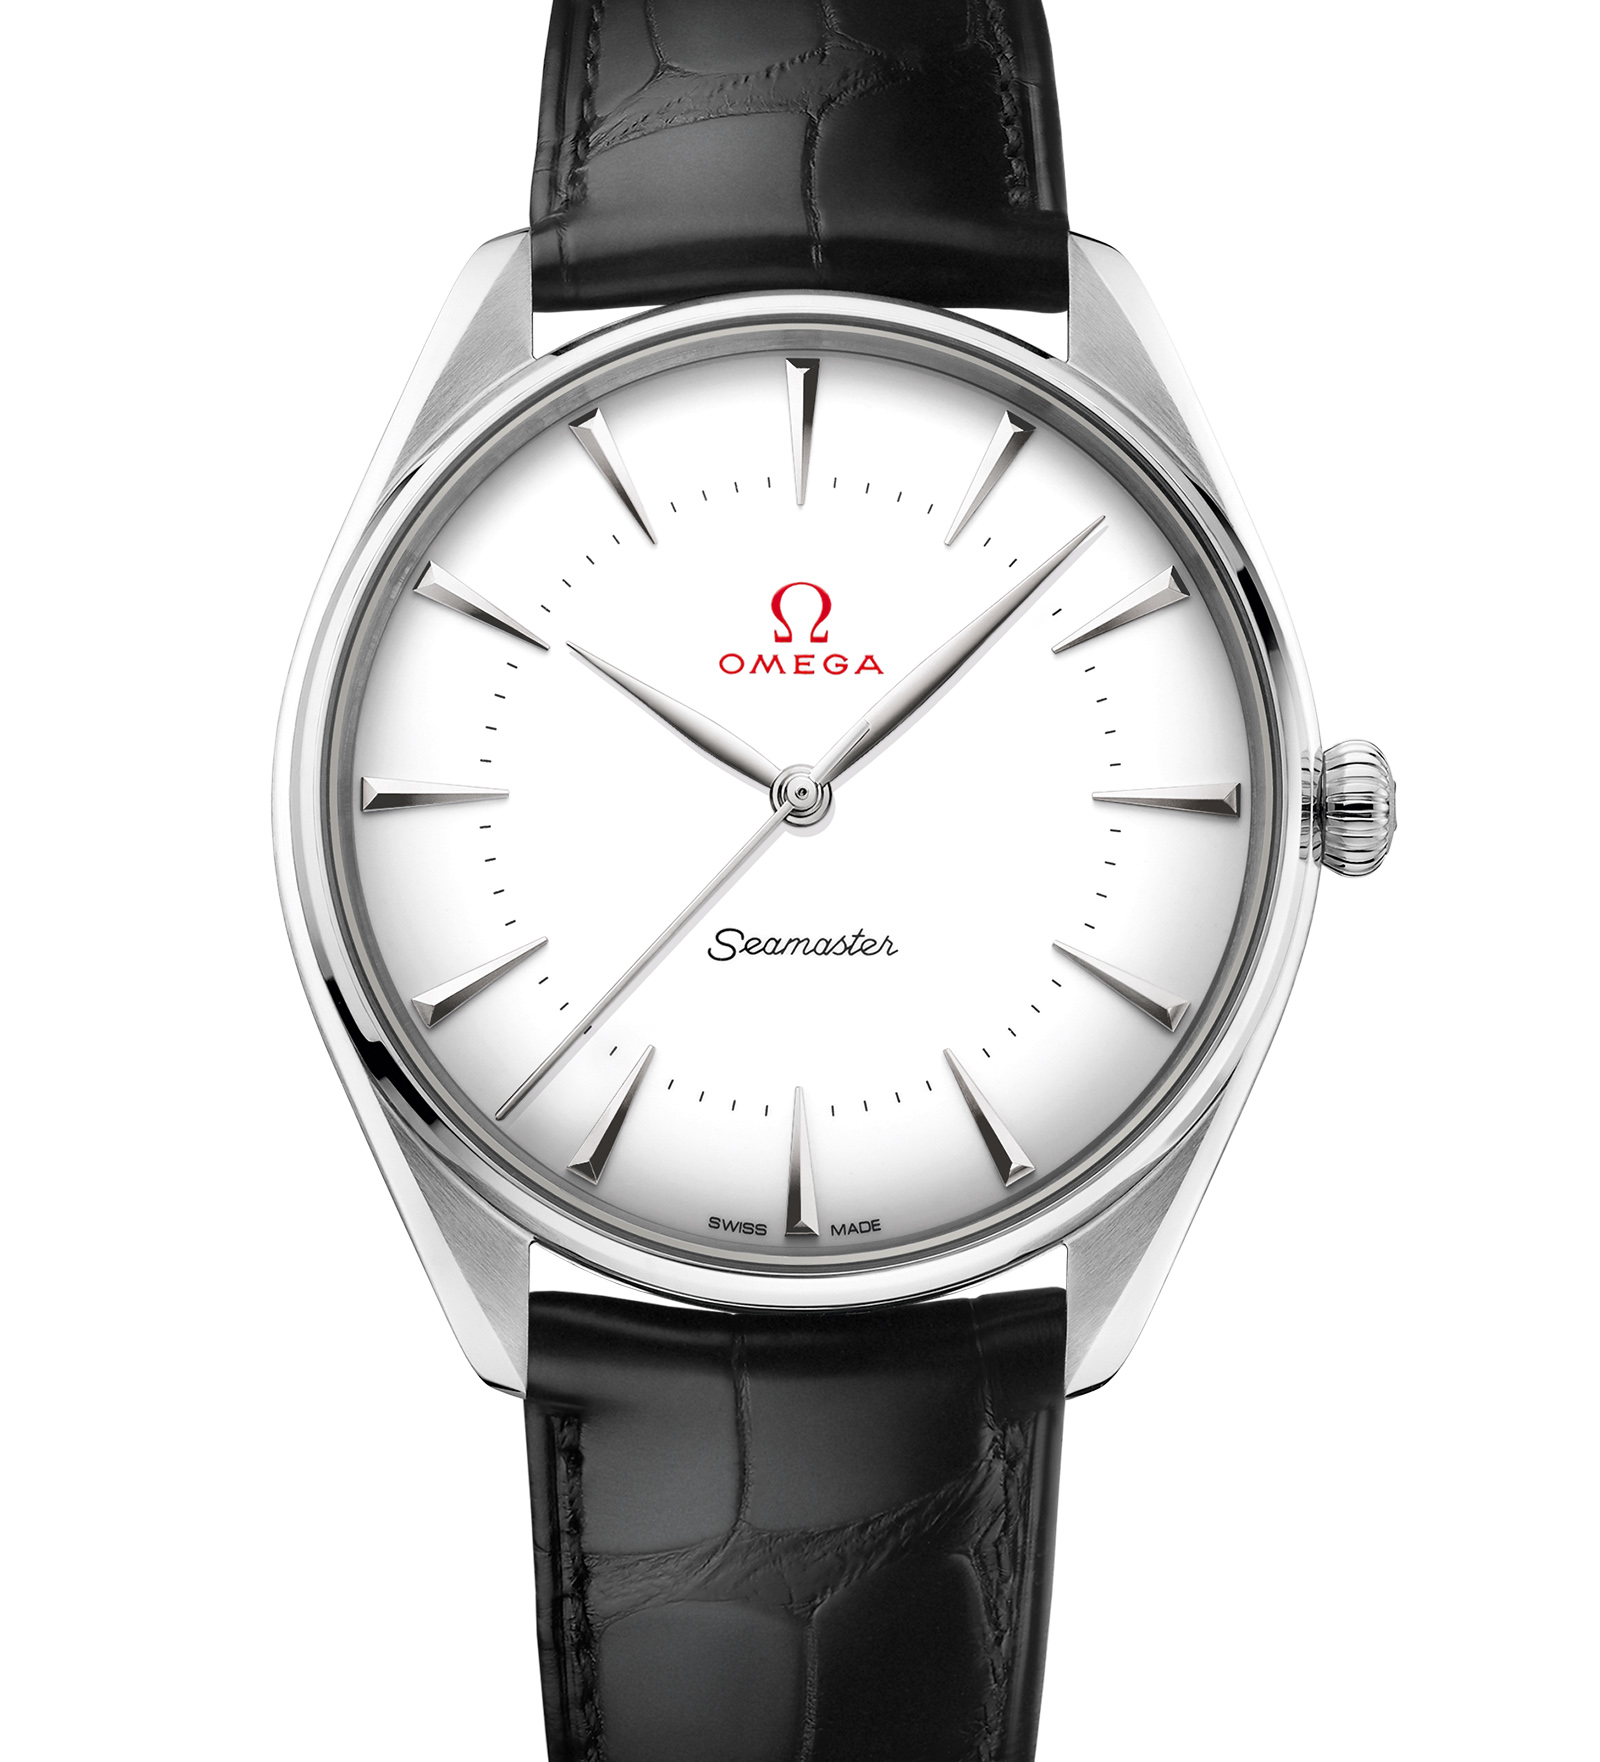 Omega Seamaster Olympic Games Canopus Gold